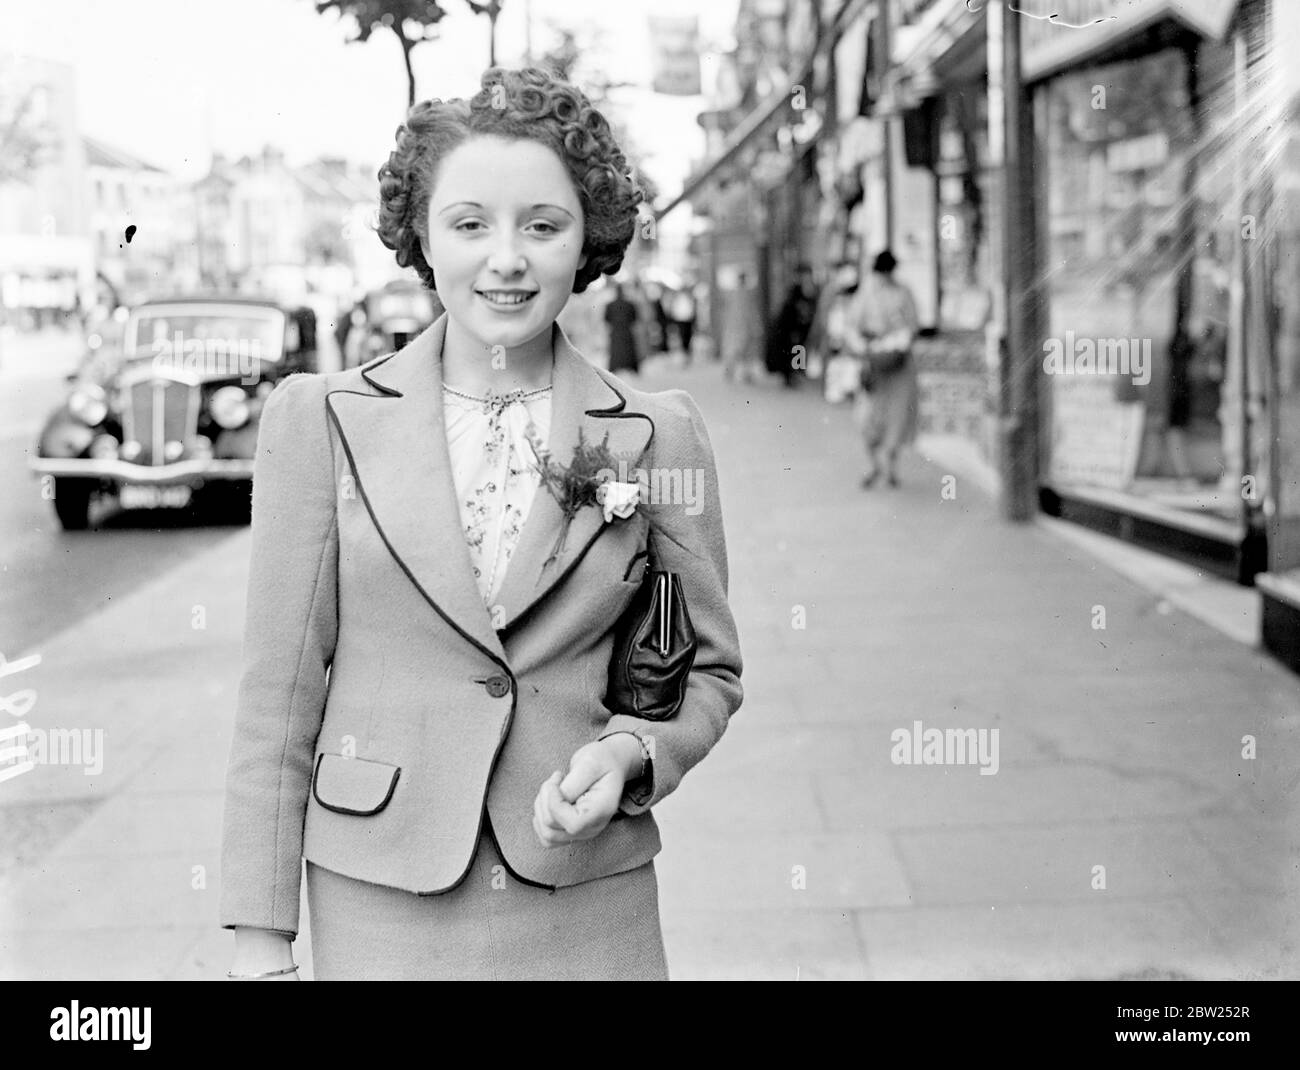 Usherette of 17 chosen Finchley's Beauty Queen. After entering for a beauty contest without telling her father, Miss Joan Edwards of Hendon, a 17 year old cinema usherette, has been elected Beauty Queen of Finchley. Photo shows, Miss Joan Edwards after her election. 30 July 1938 Stock Photo